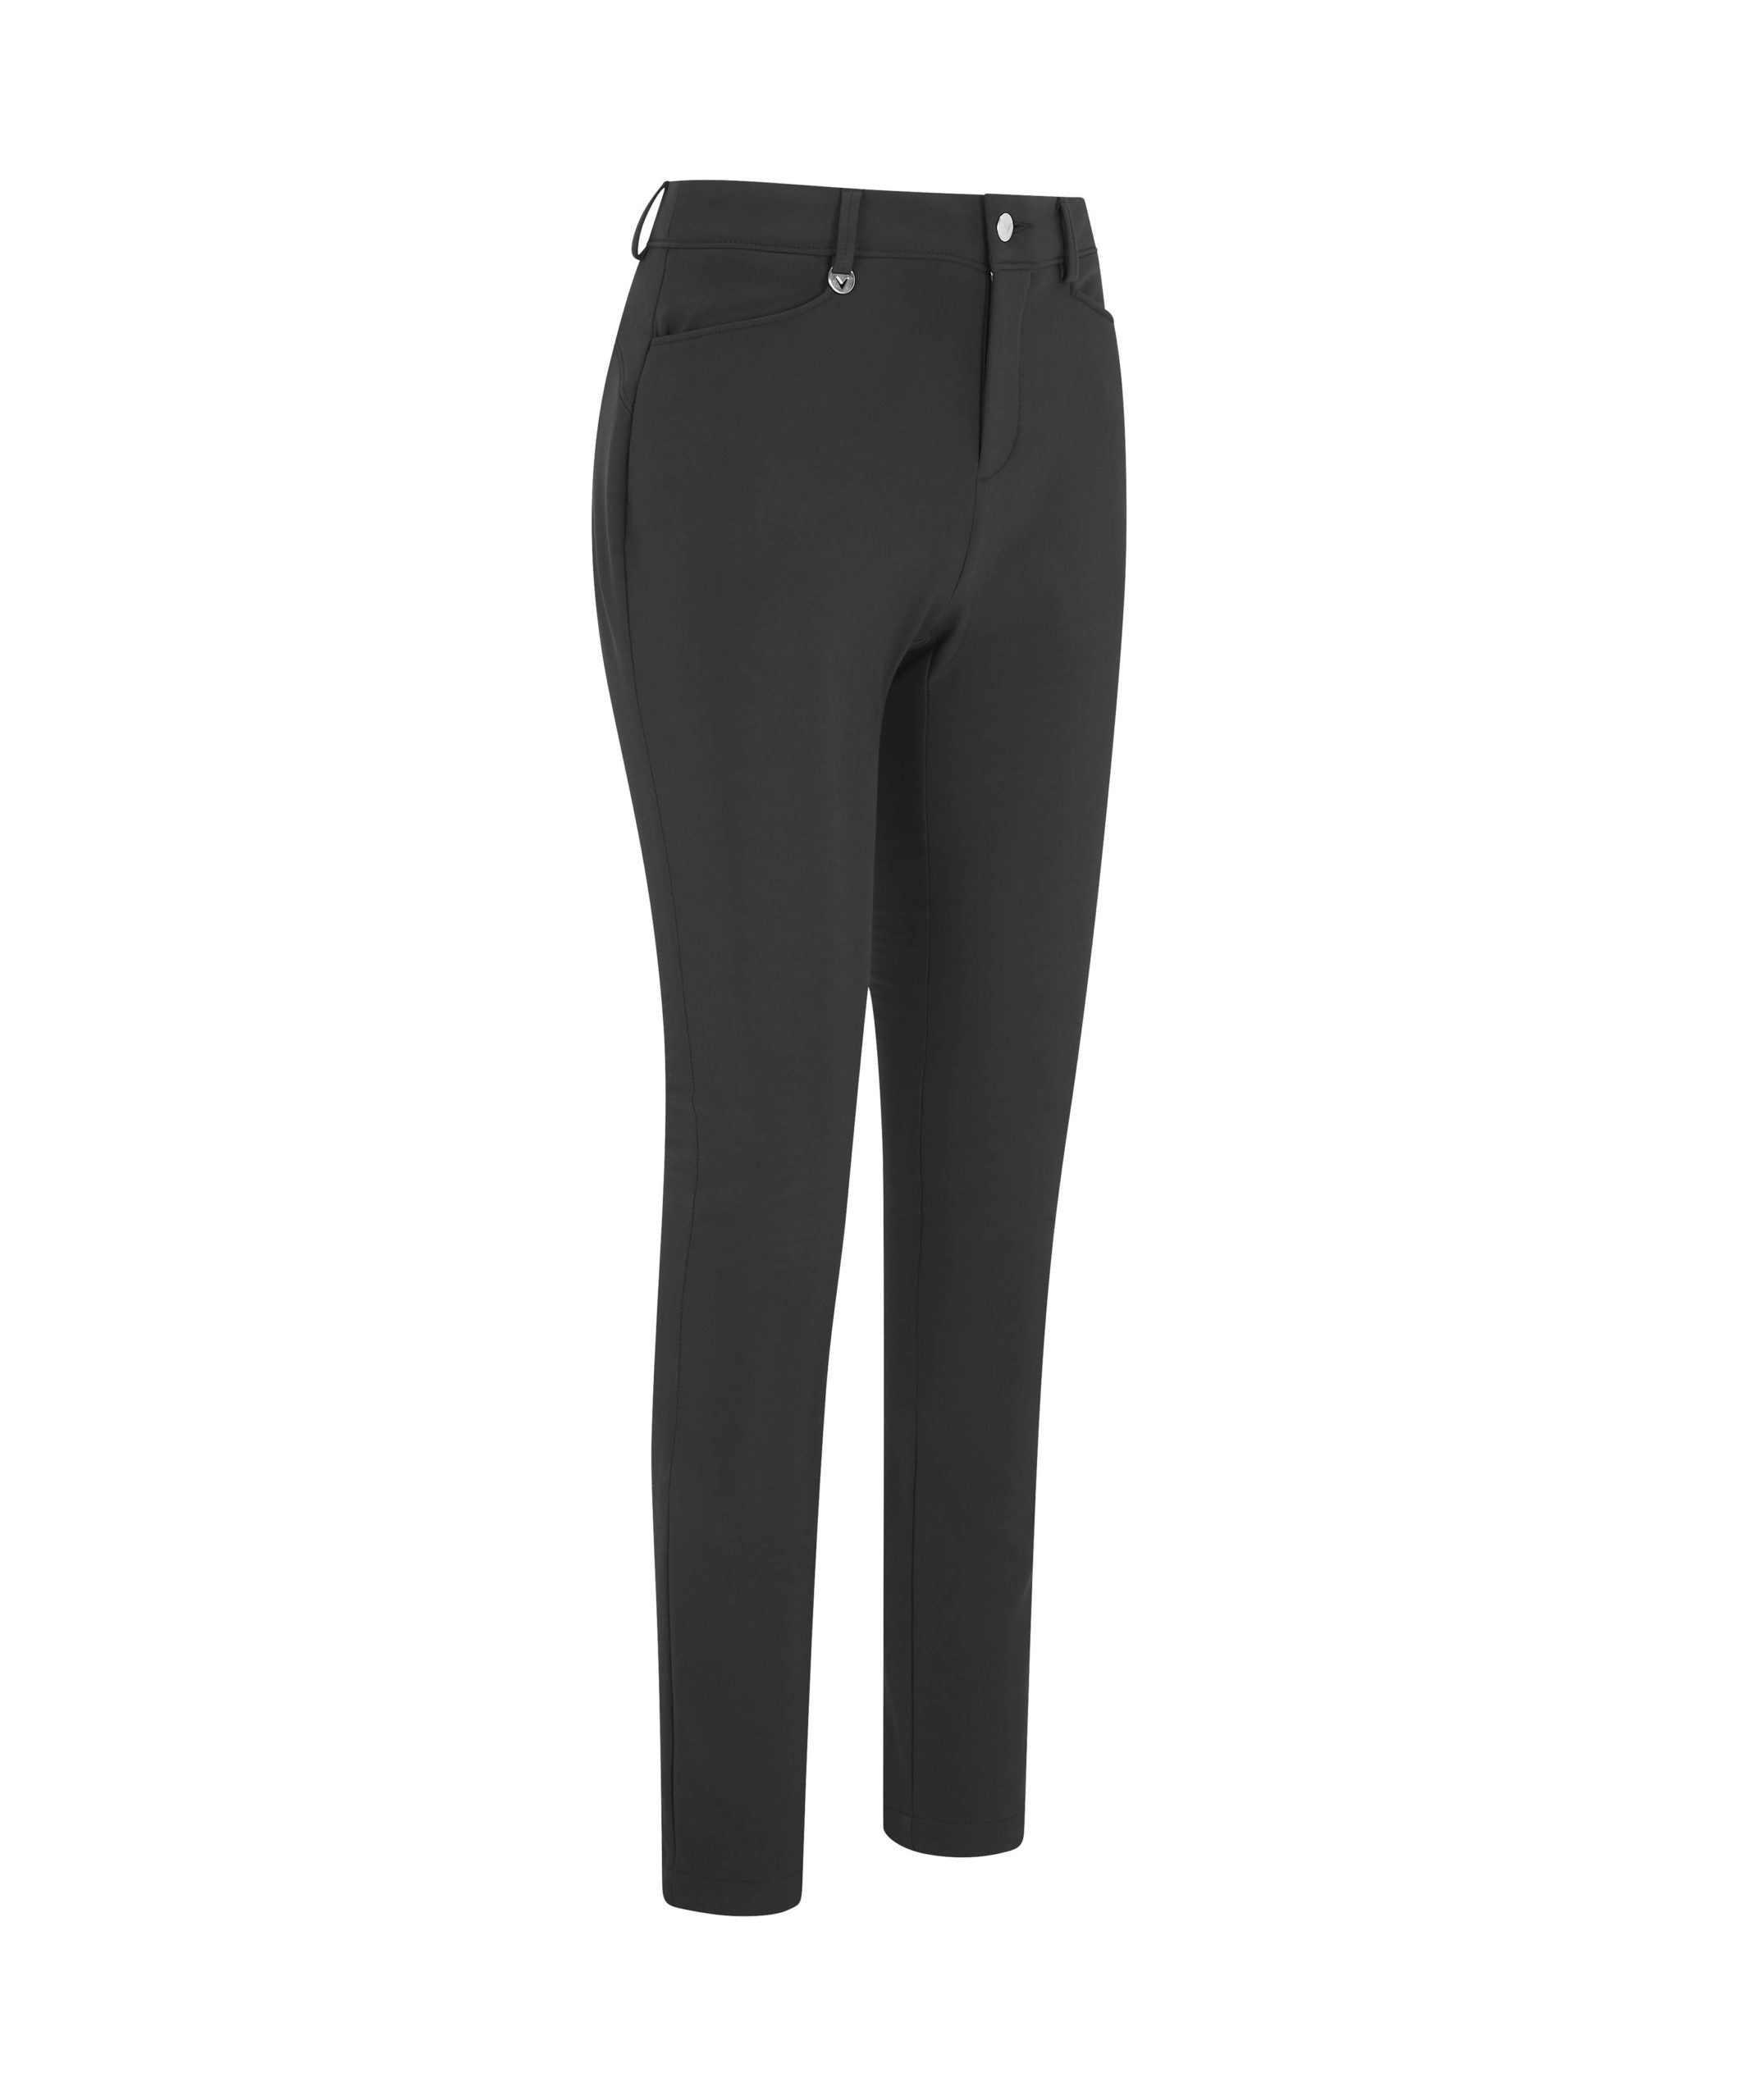 View Thermal Trousers In Caviar Caviar 2 32 information